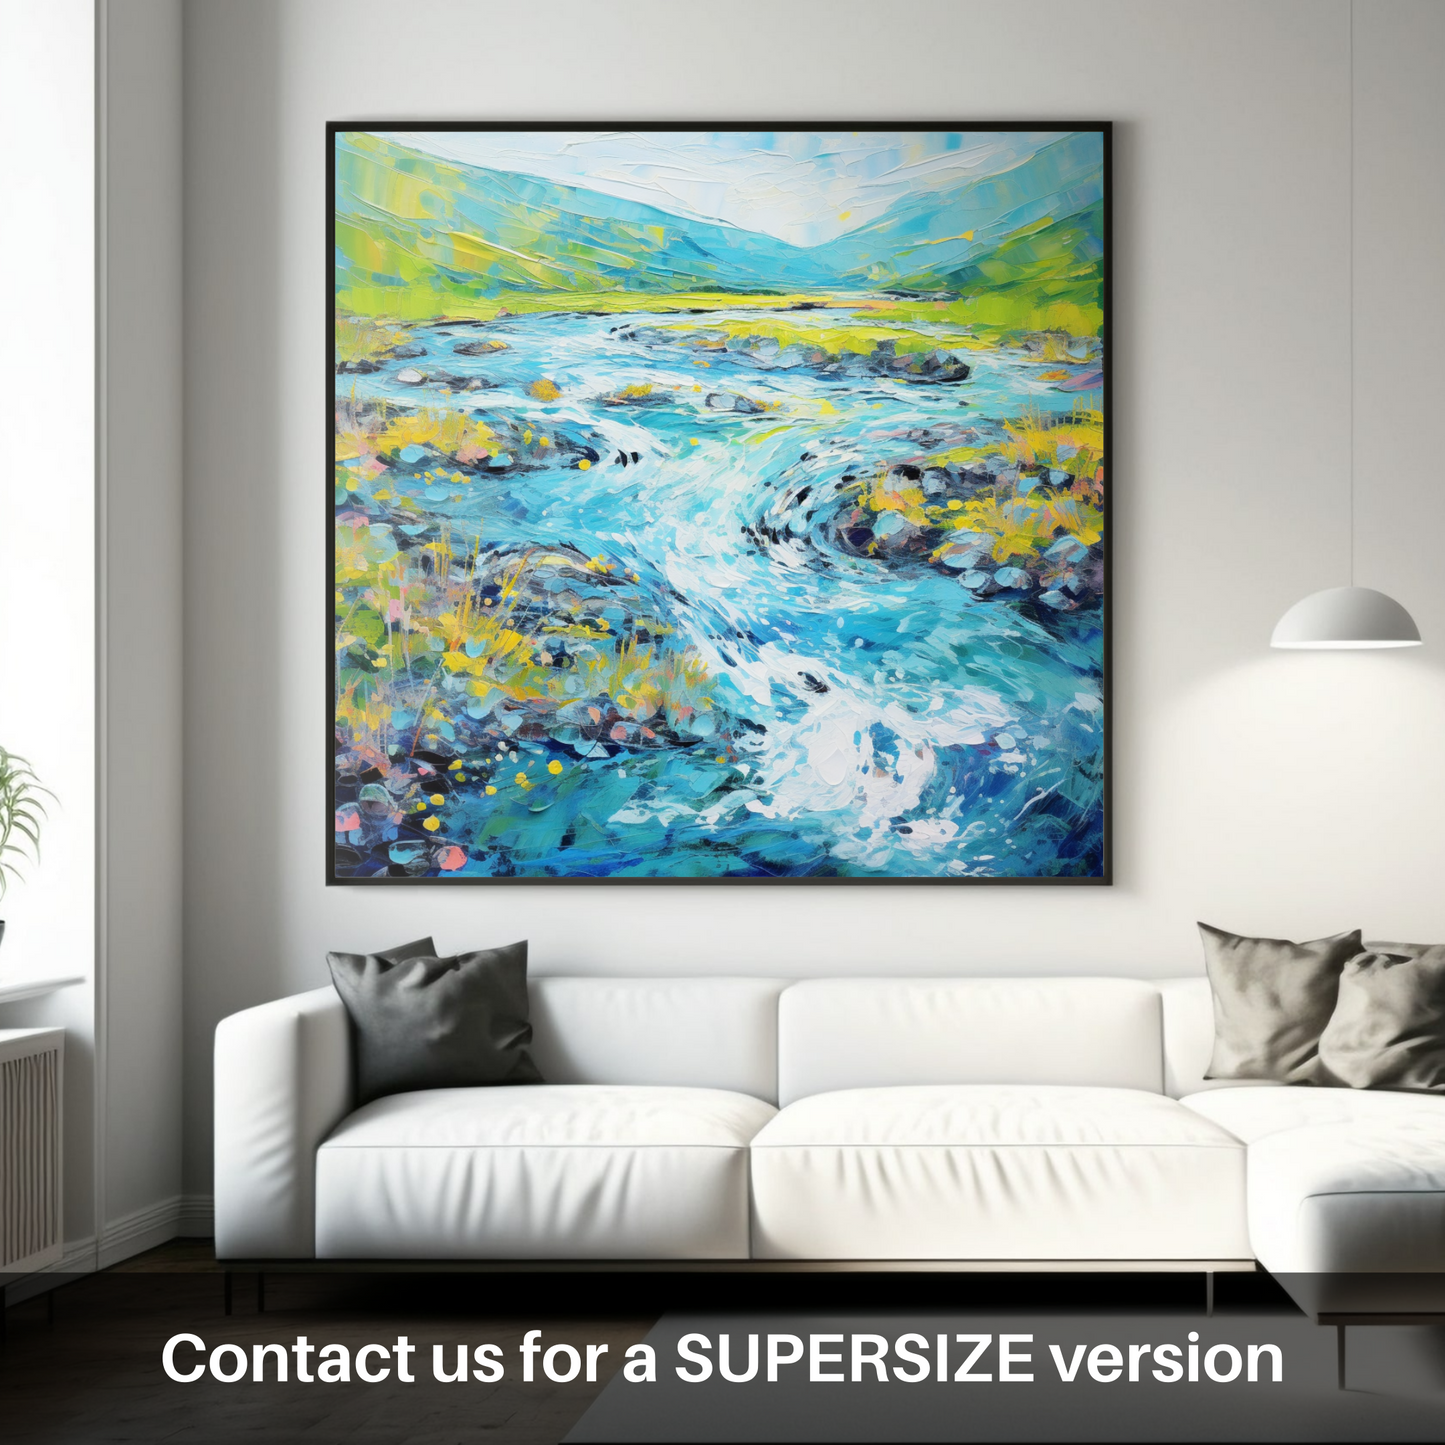 Huge supersize print of River Etive, Argyll and Bute in summer